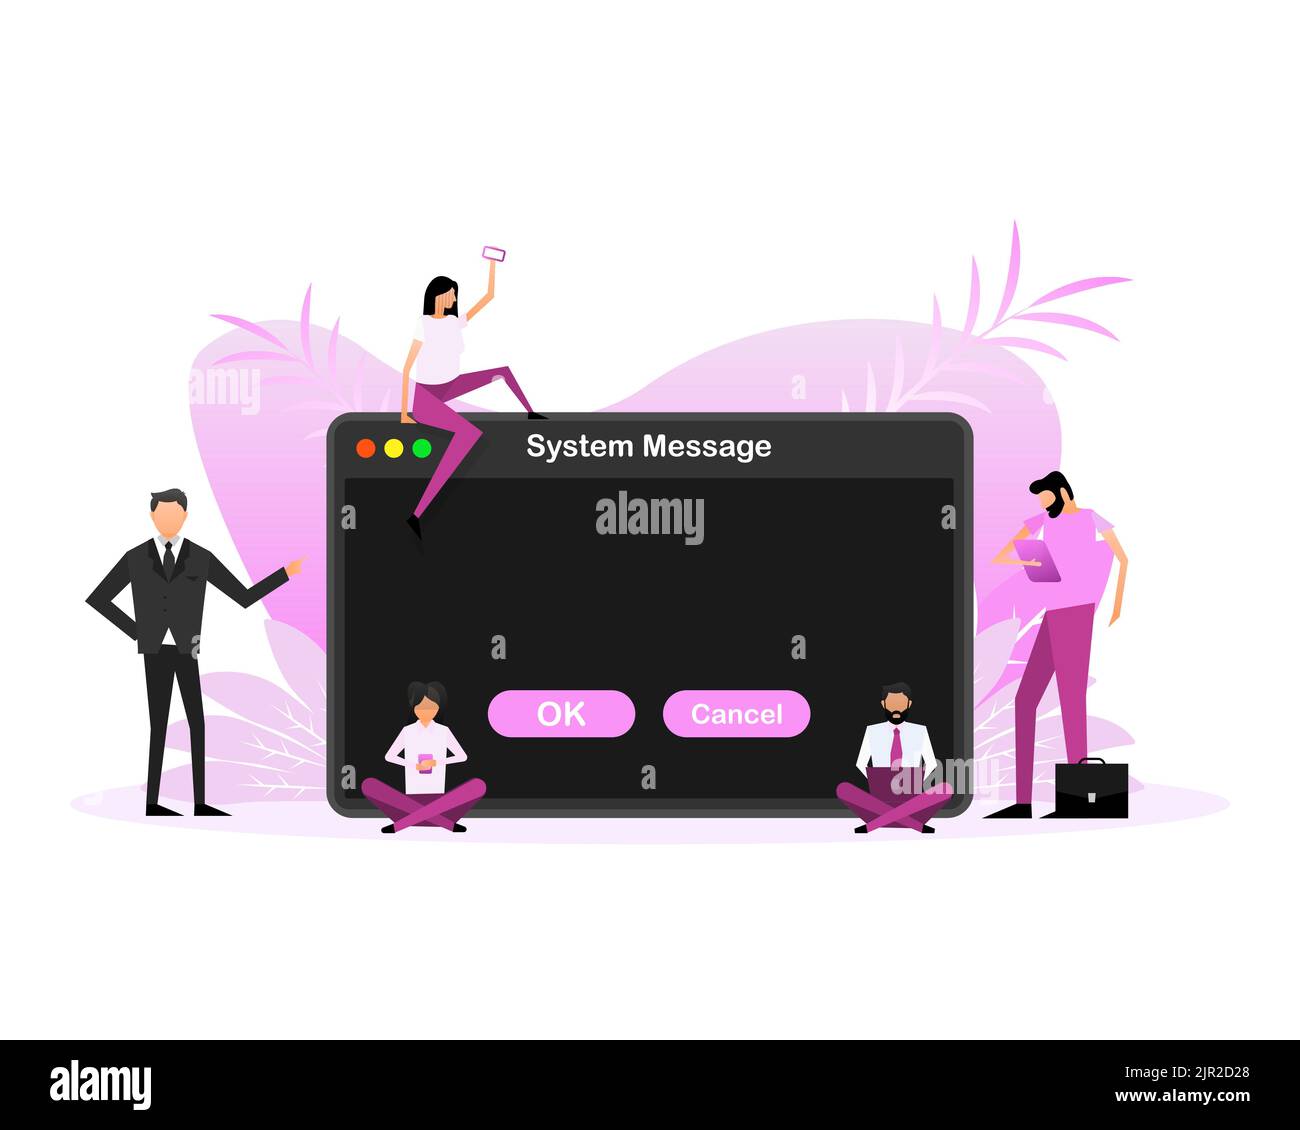 System message people, great design for any purposes. Vector illustration Stock Vector